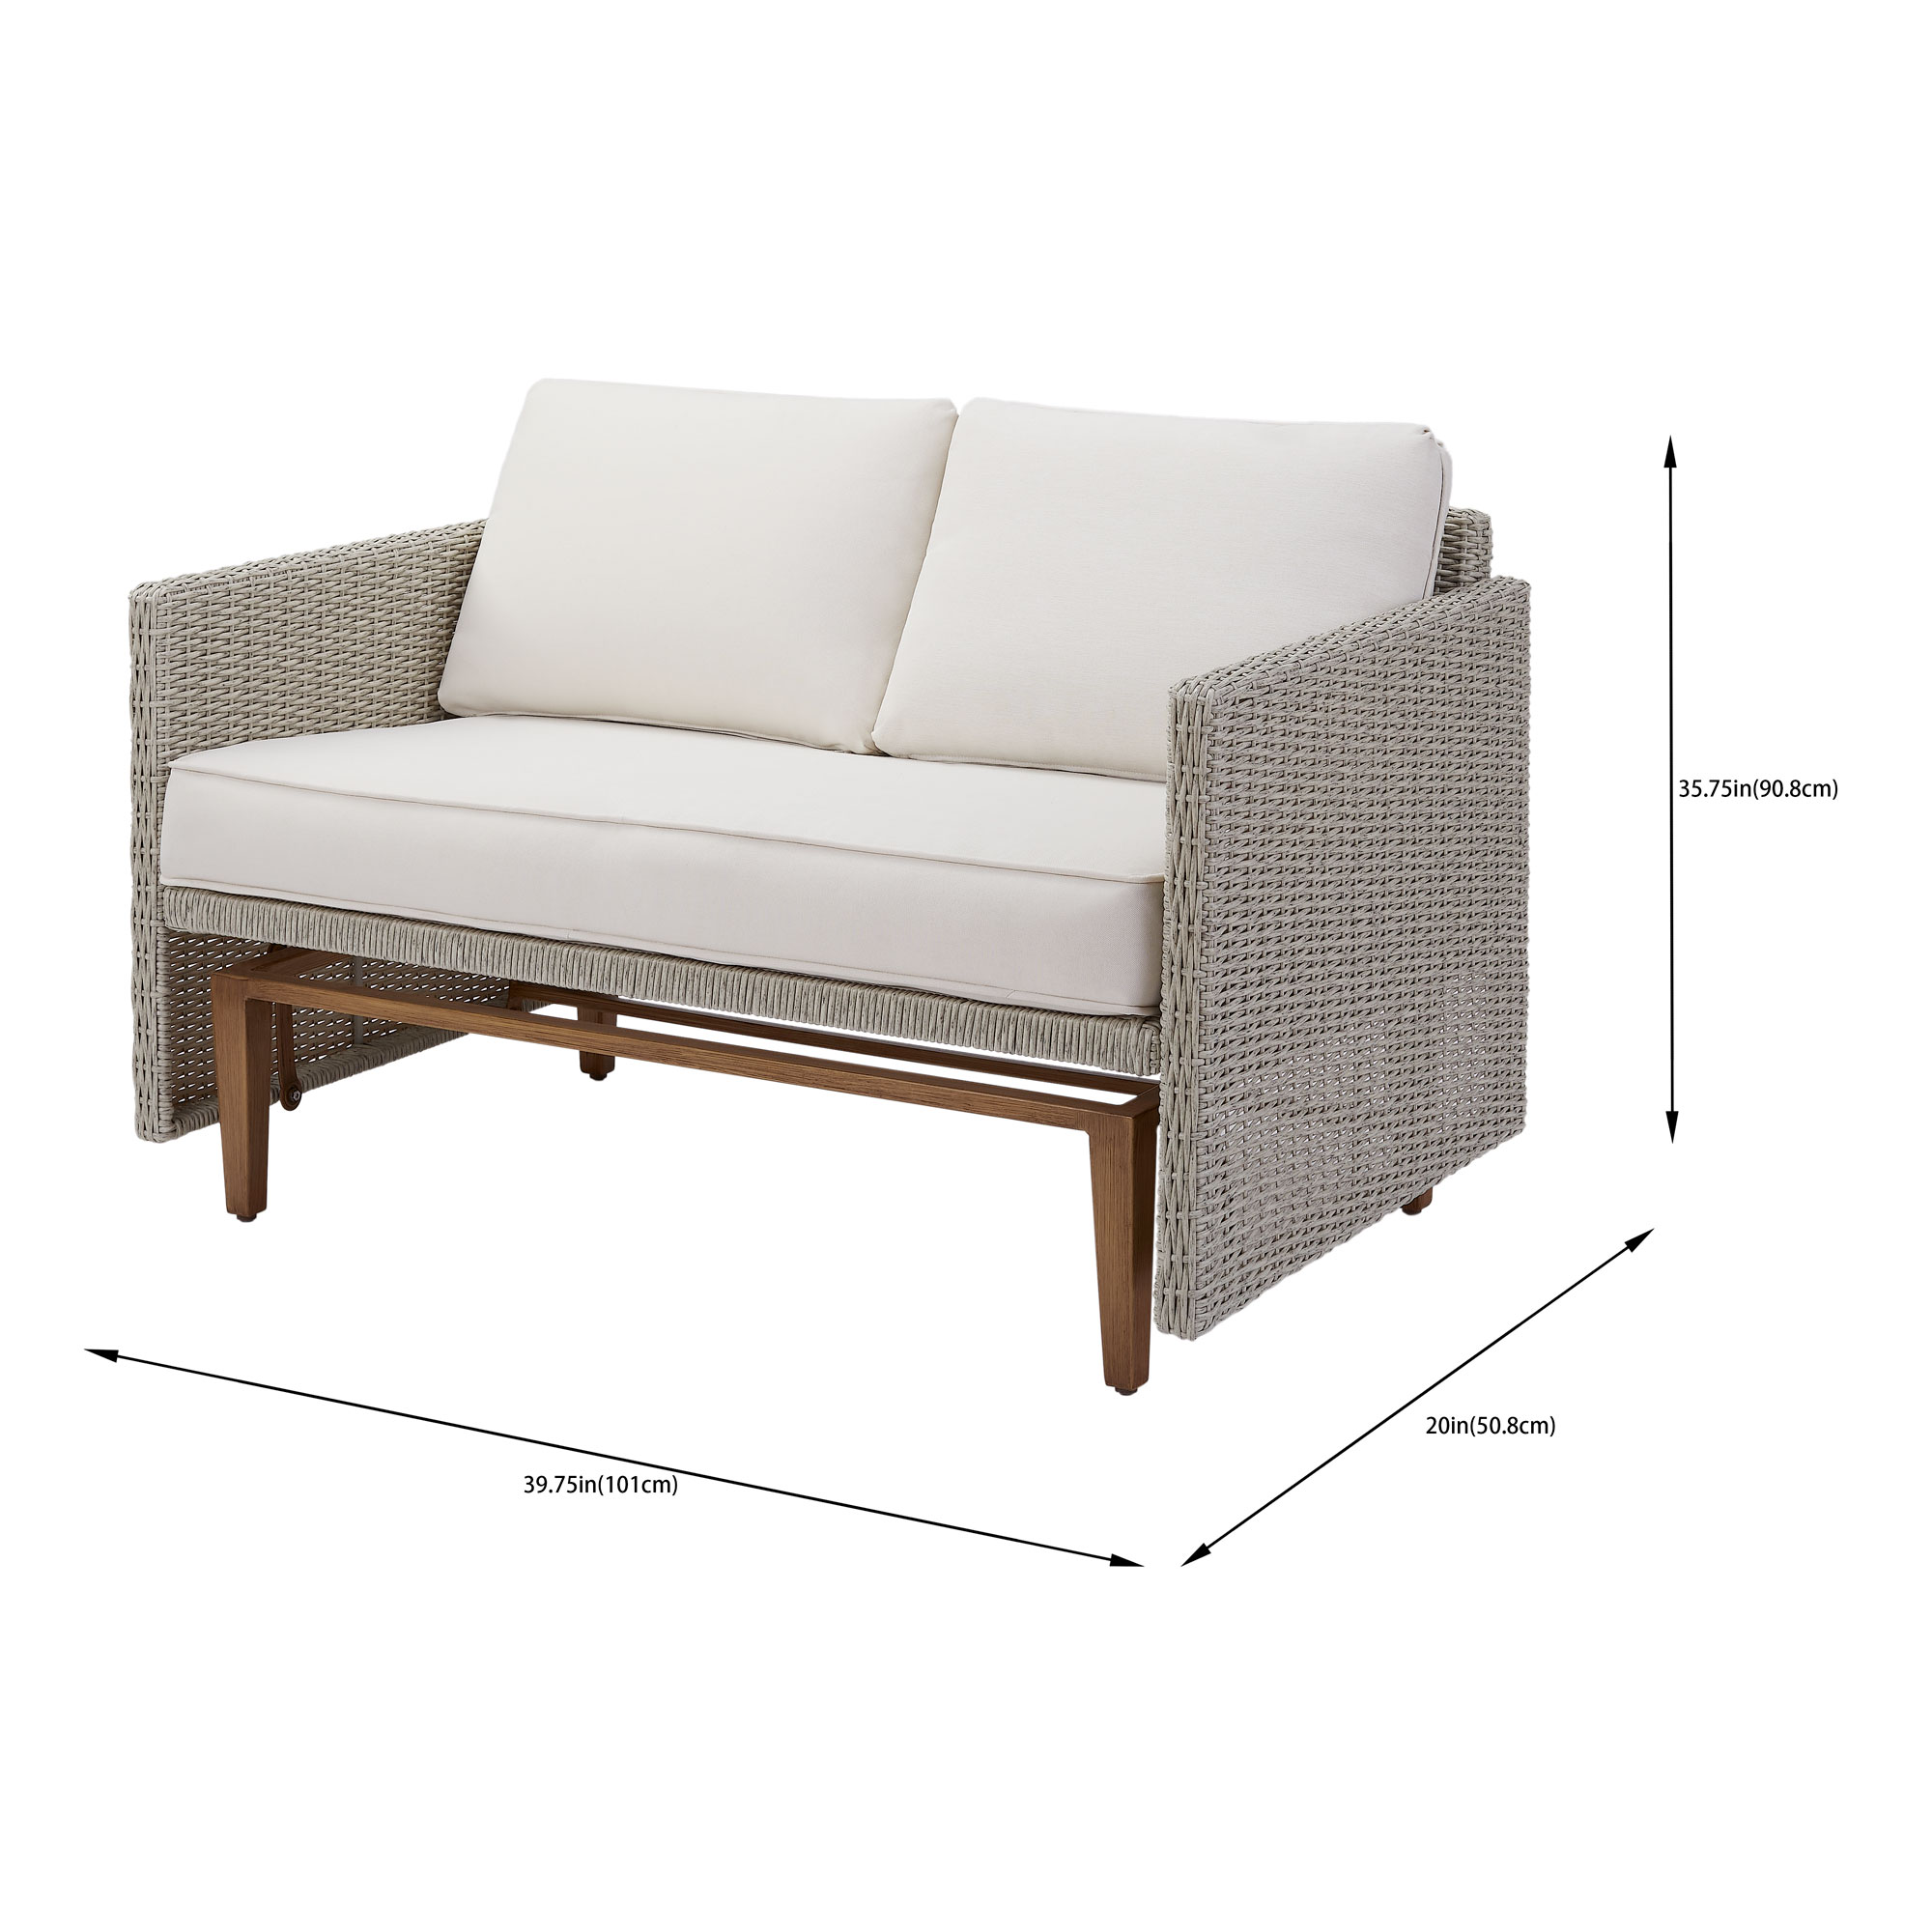 Better Homes & Gardens Davenport Outdoor Loveseat Glider Bench, White and Gray - image 5 of 5